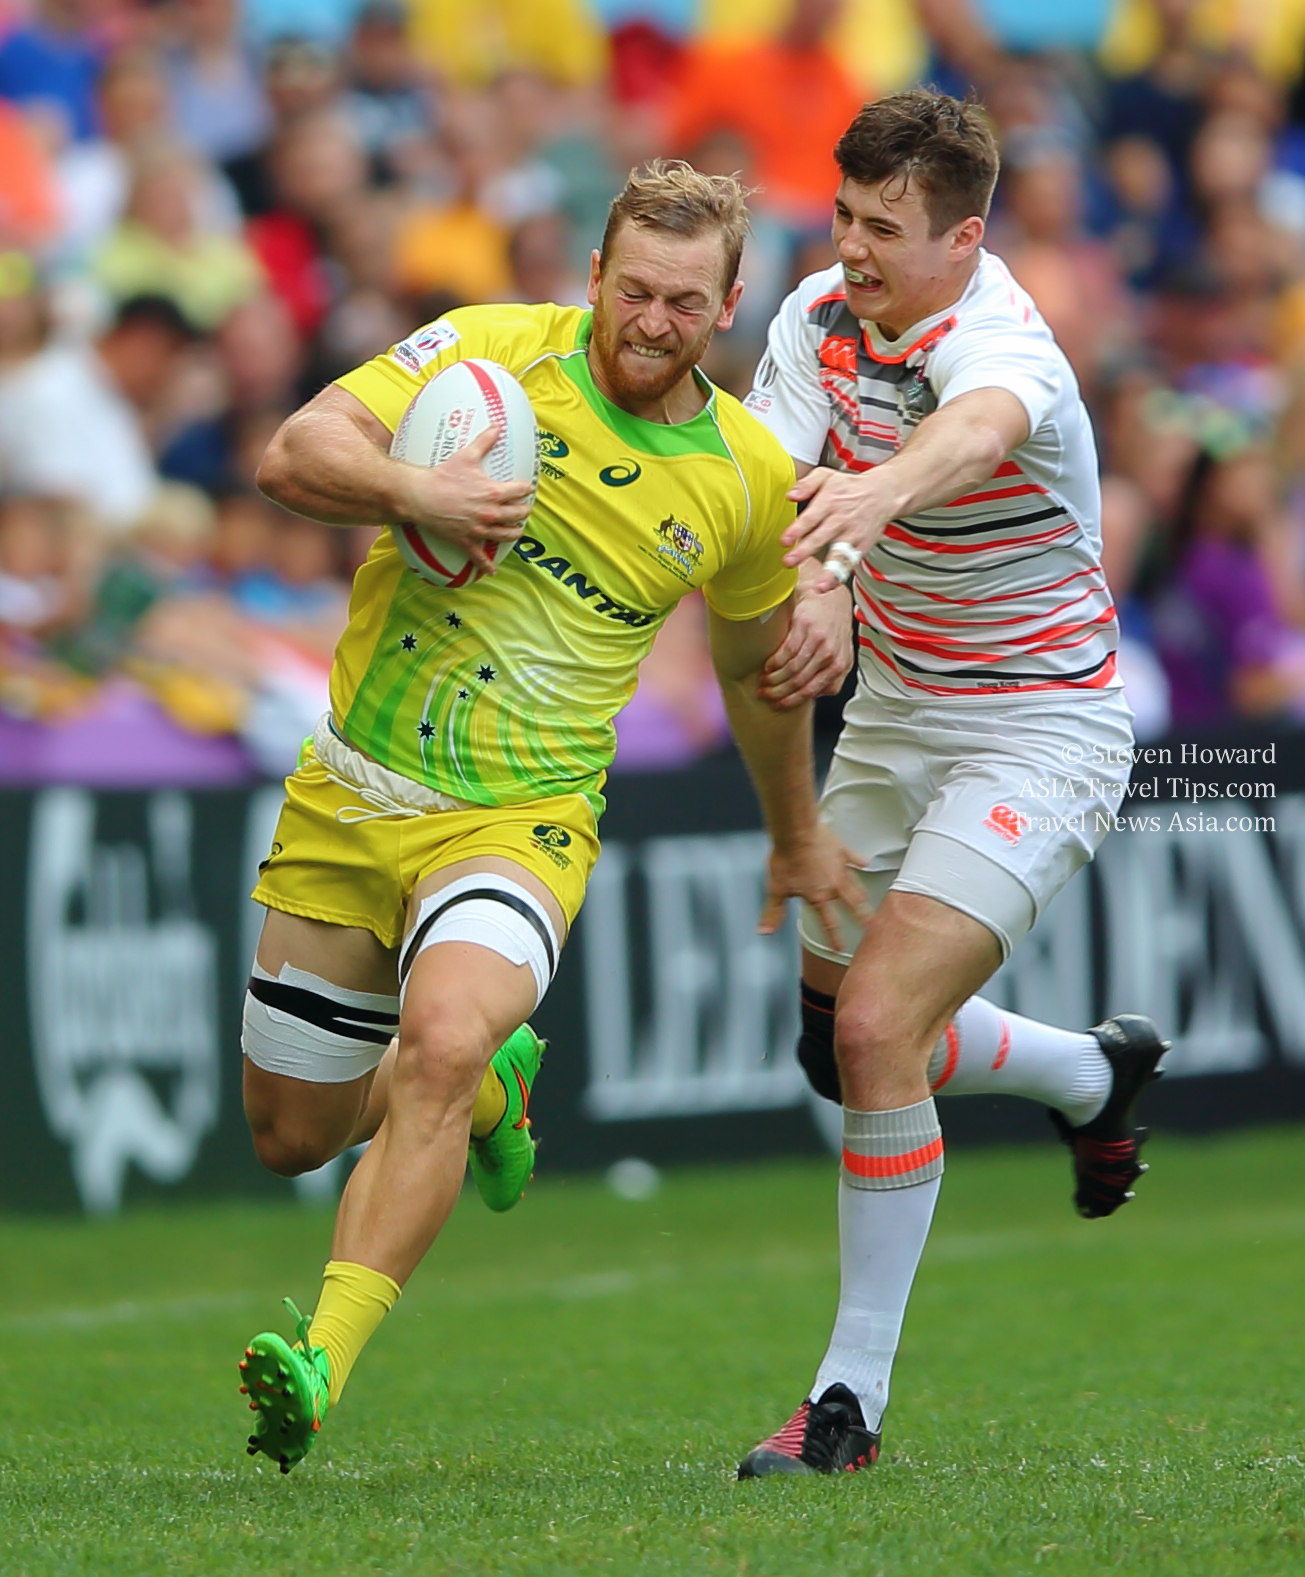 Ben O’Donnell (Australia) in action at the 2018 Cathay Pacific / HSBC Hong Kong Sevens. Pictures taken by Steven Howard of TravelNewsAsia.com Click to enlarge.